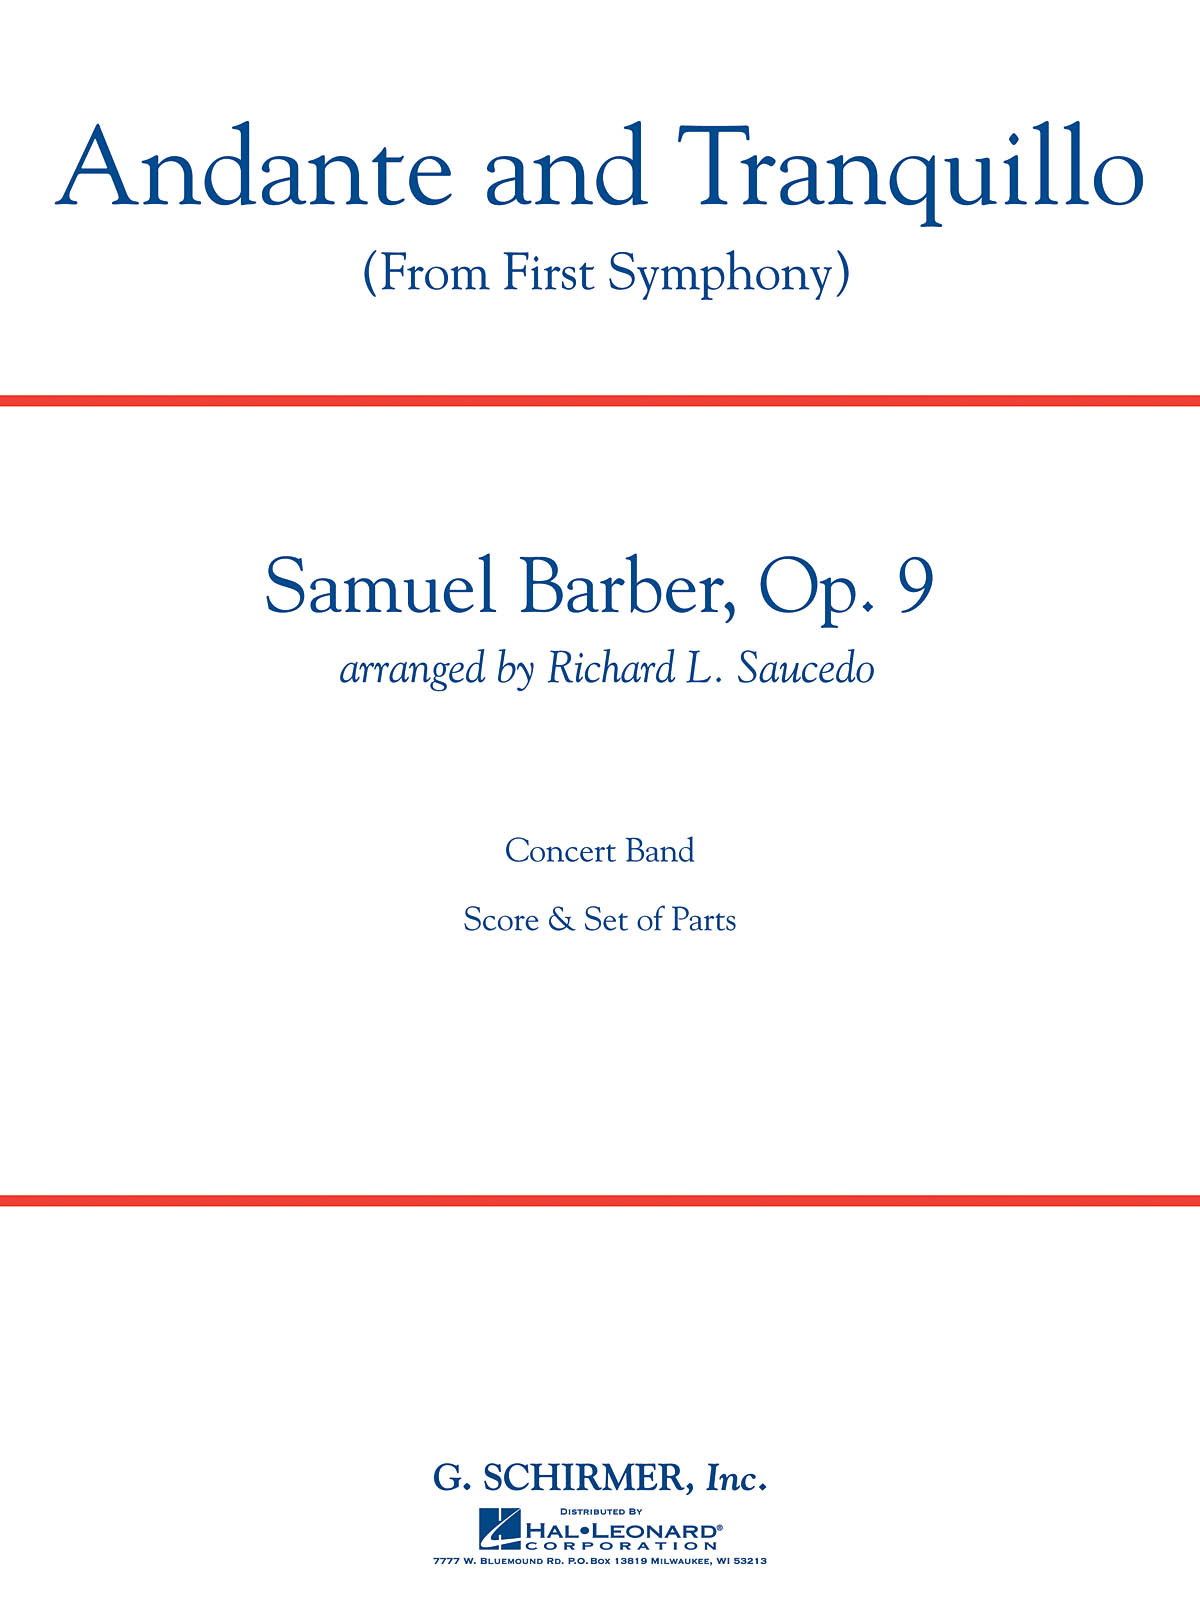 Samuel Barber: Andante And Tranquillo (From First Symphony) Sc/Pts